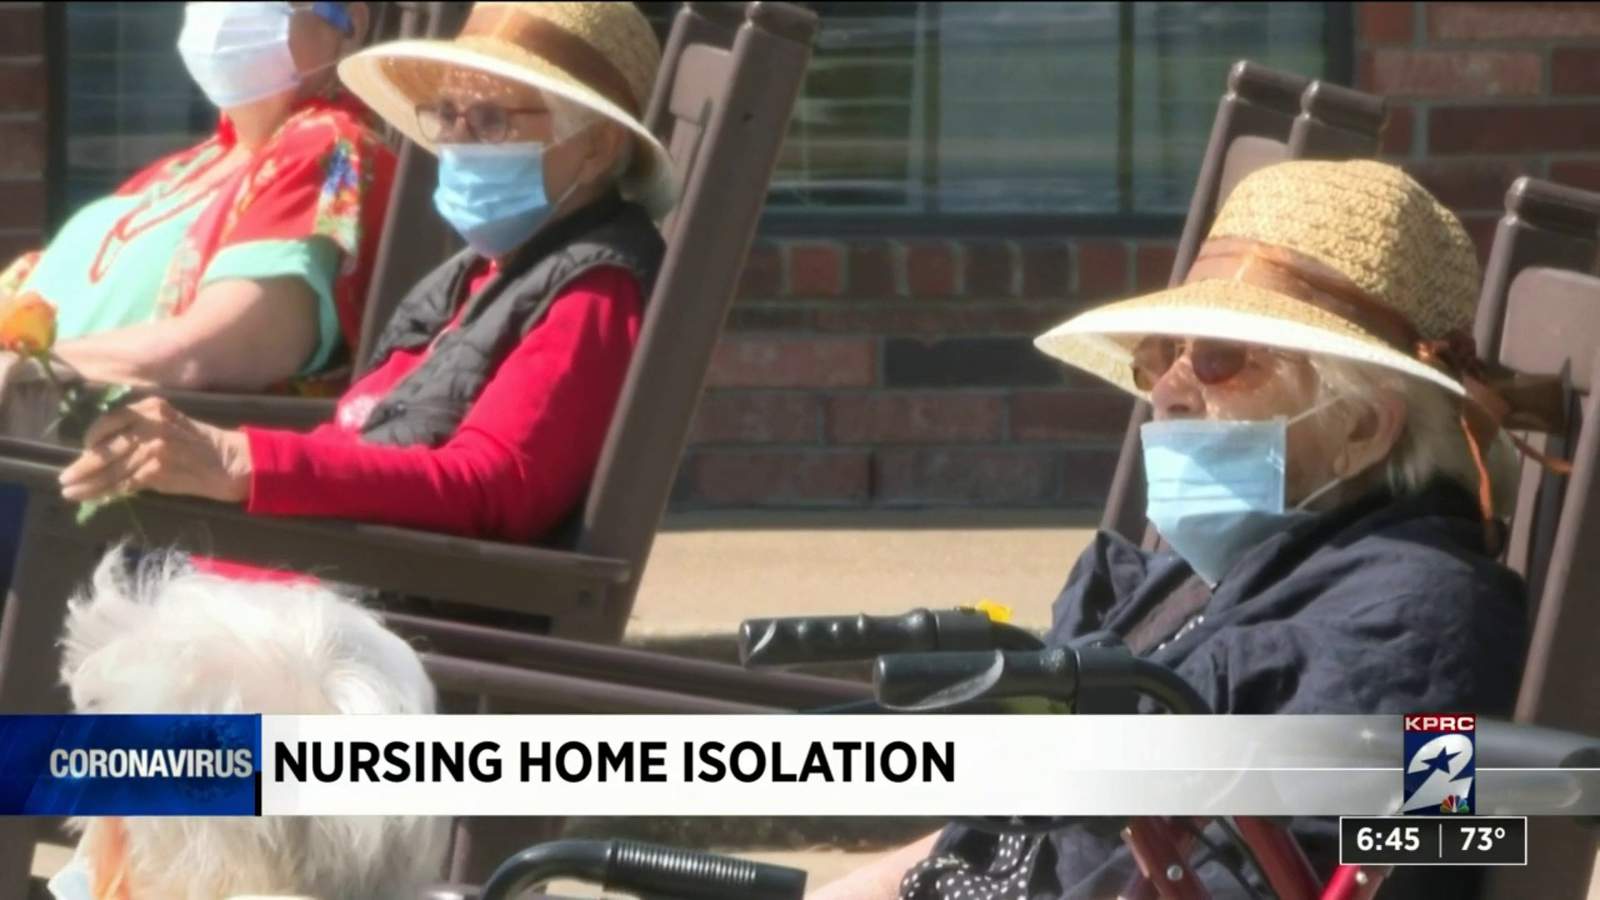 No guidelines in place yet for families of nursing home residents to be reunited